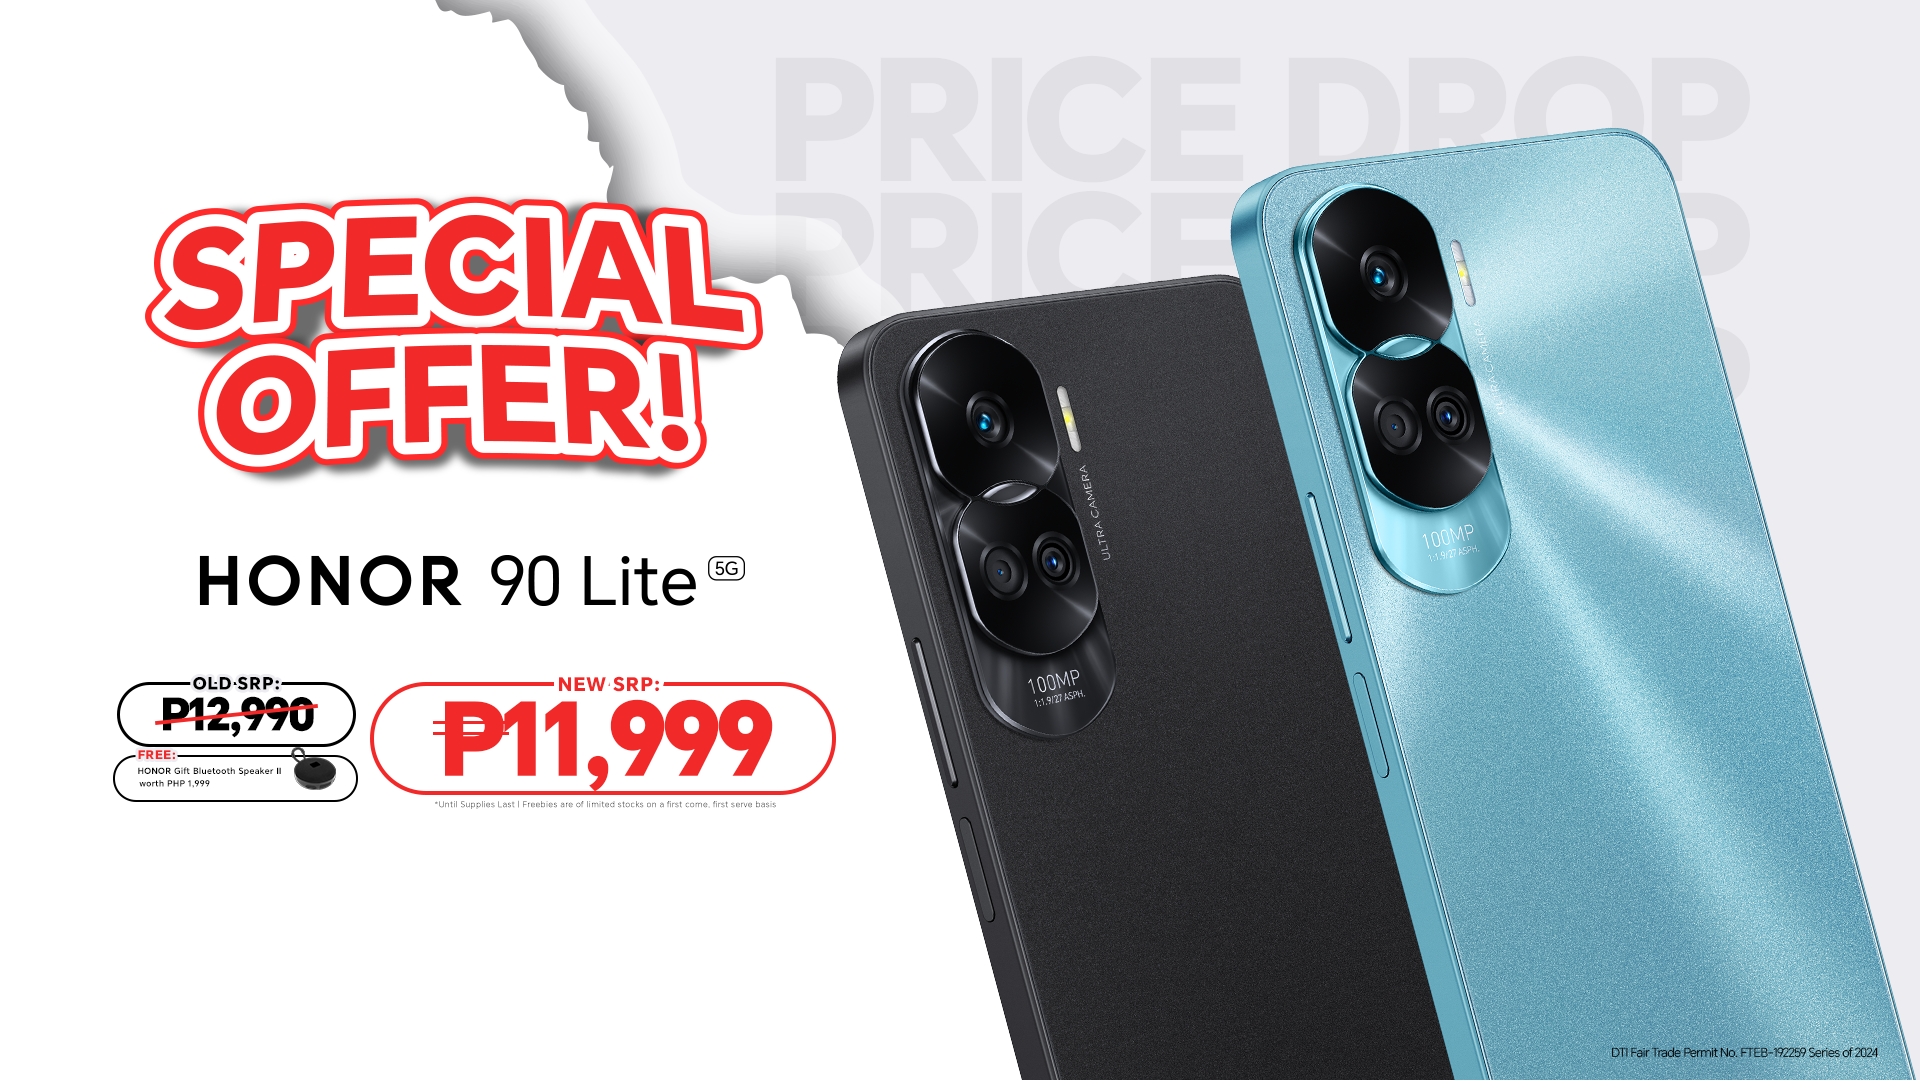 Limited Time Offer: Save Php 1,000 and Grab a FREE Bluetooth Speaker with the HONOR 90 Lite 5G!